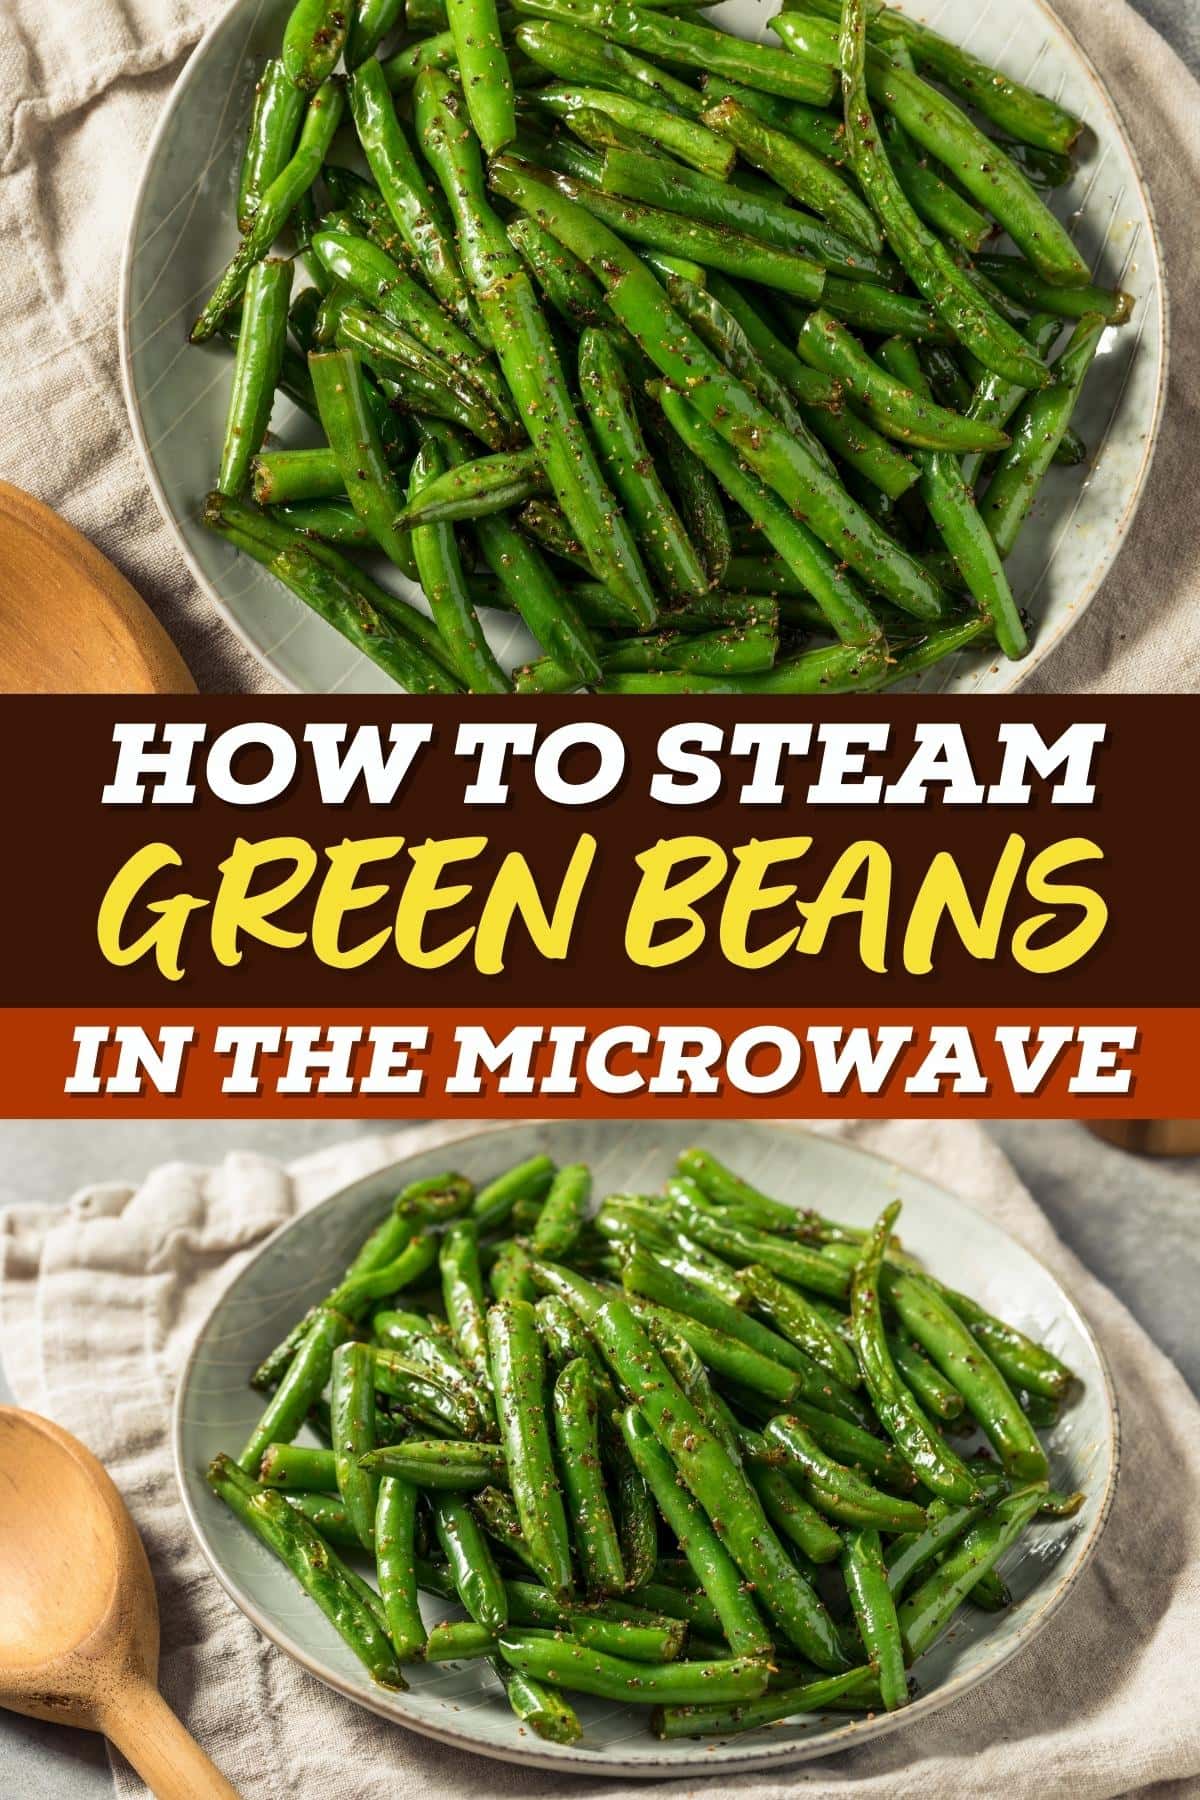 How to Steam Green Beans in the Microwave